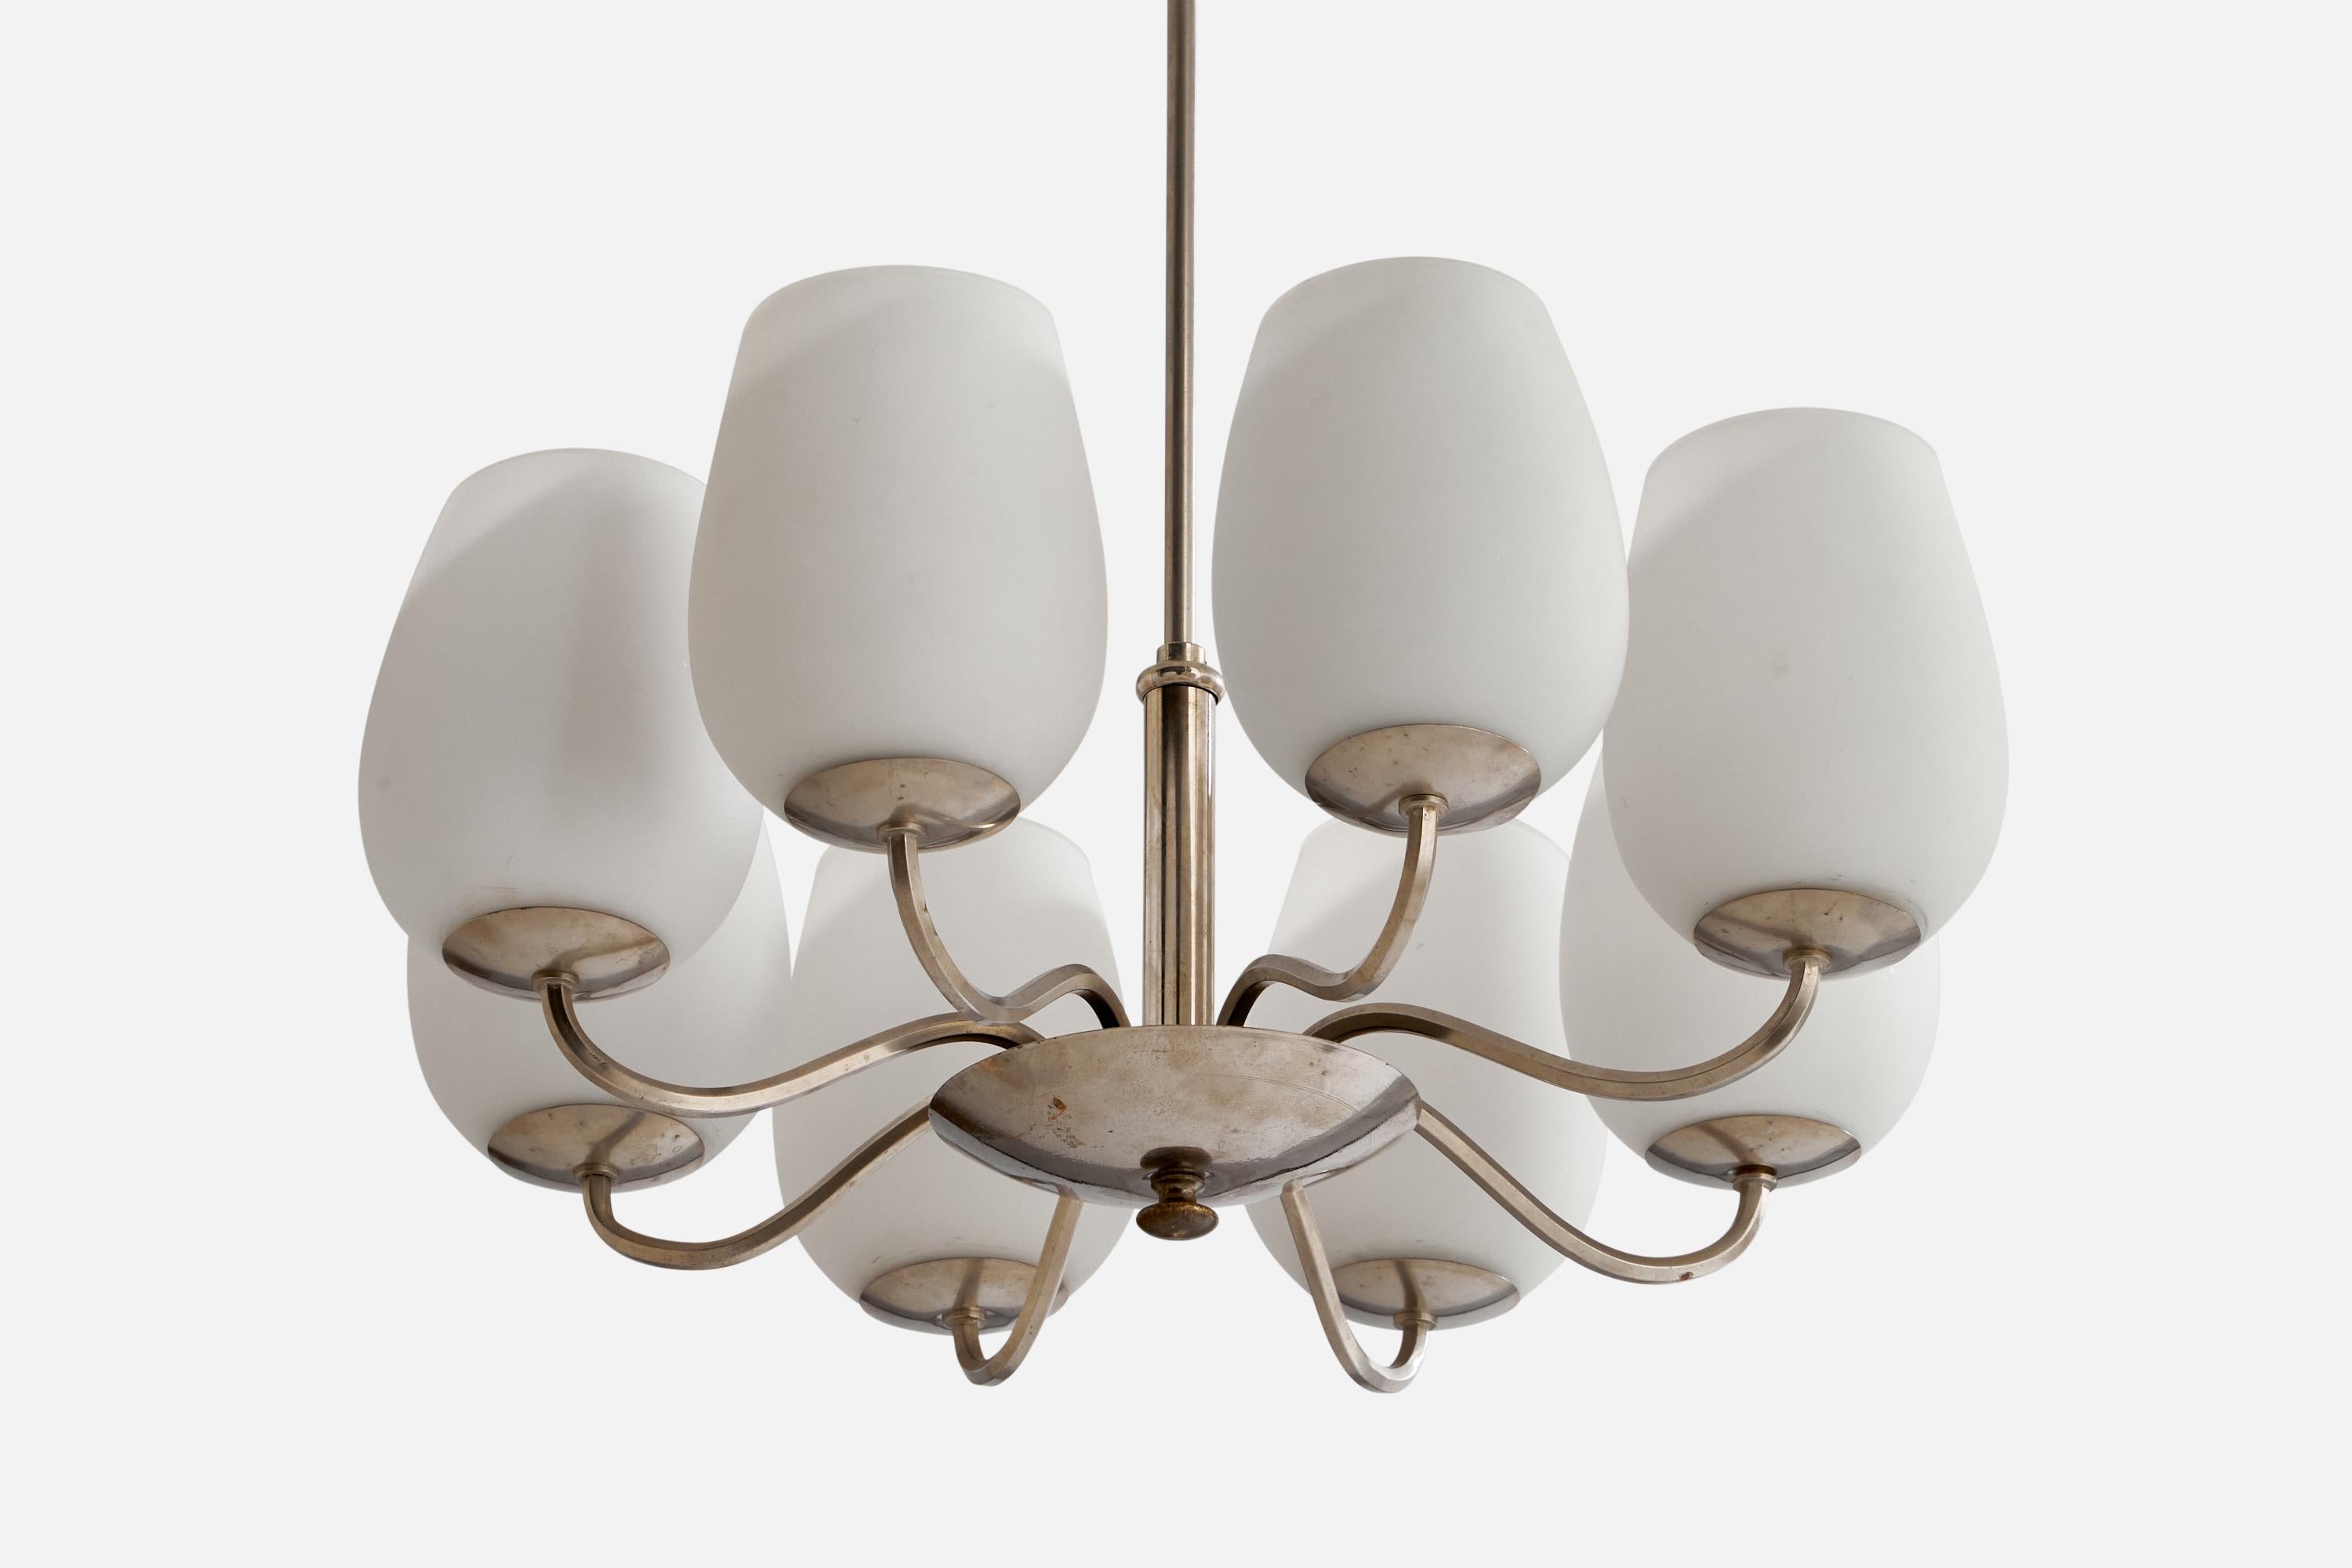 A nickel-plated brass and opaline glass chandelier, model 5057/8, designed by Paavo Tynell and produced by Taito Oy, Finland, 1940s.

Dimensions of canopy (inches): 2.1” H x 3.55” Diameter
Socket takes standard E-26 bulbs. 8 sockets.There is no